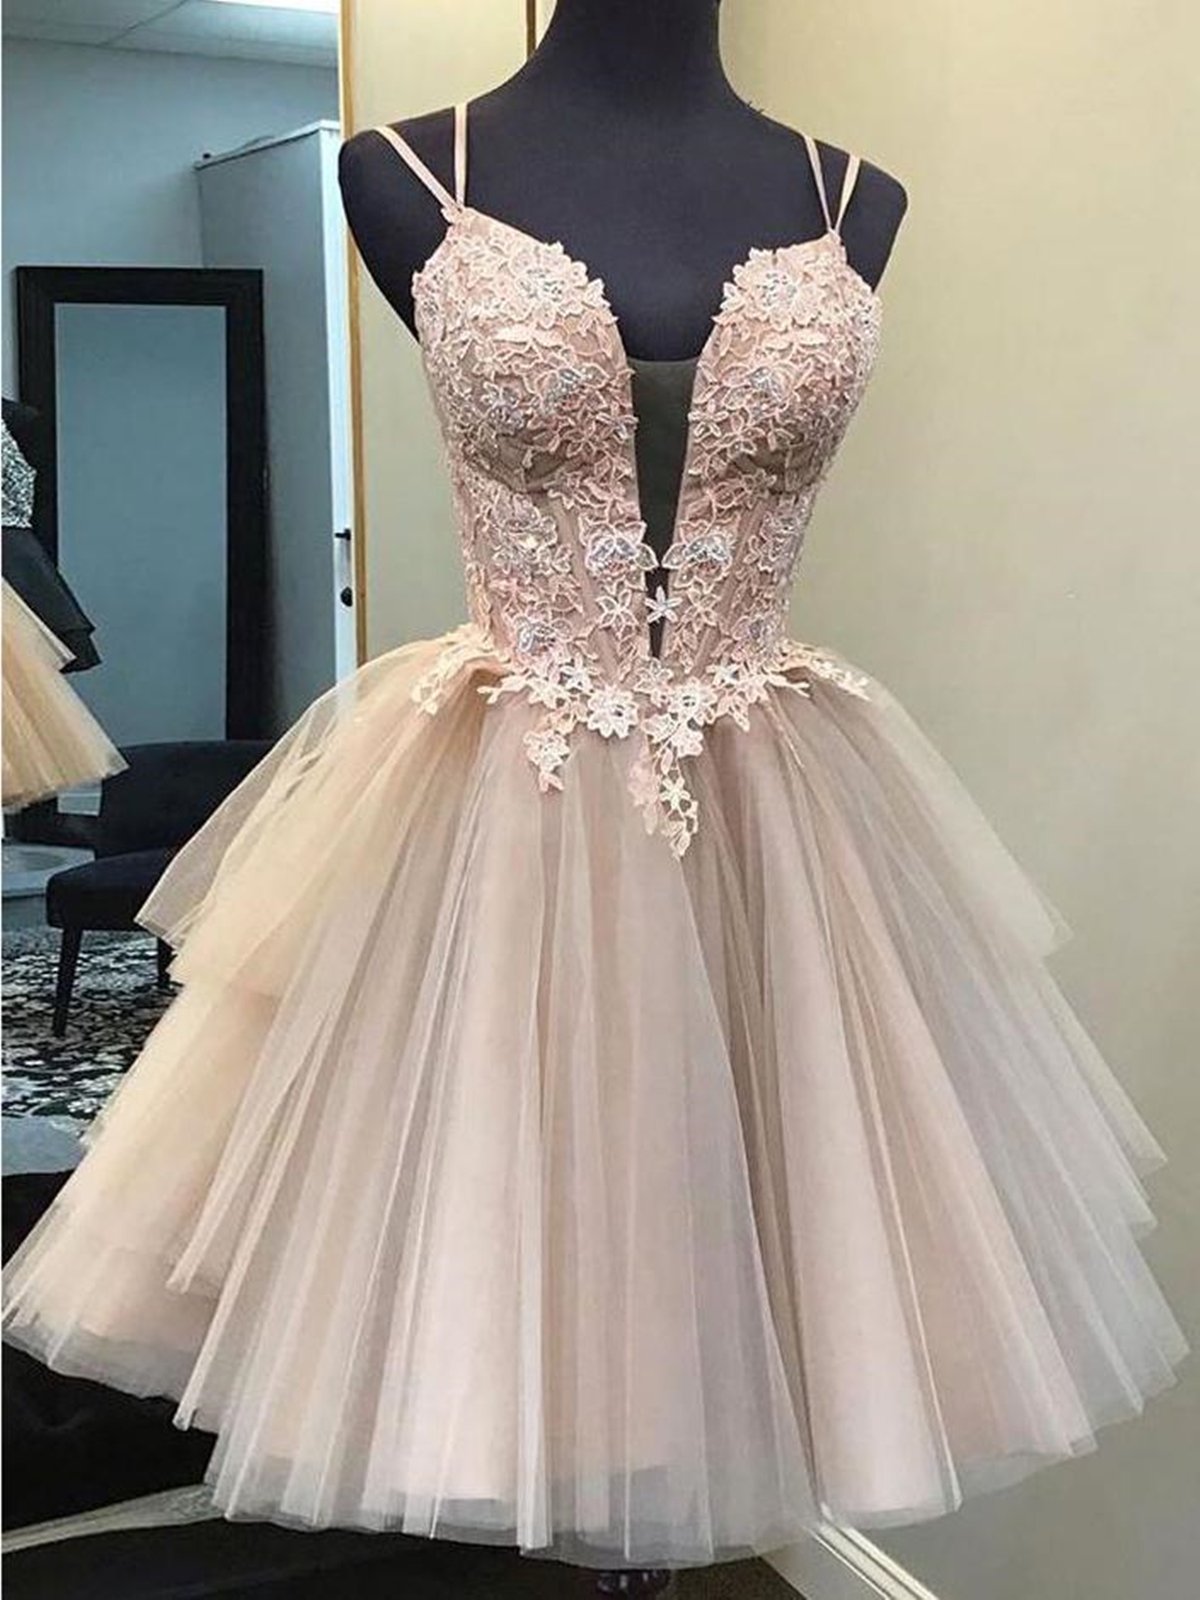 Short Backless Champagne Lace Prom Dresses For Black girls For Women, Short V Neck Champagne Lace Graduation Homecoming Dresses